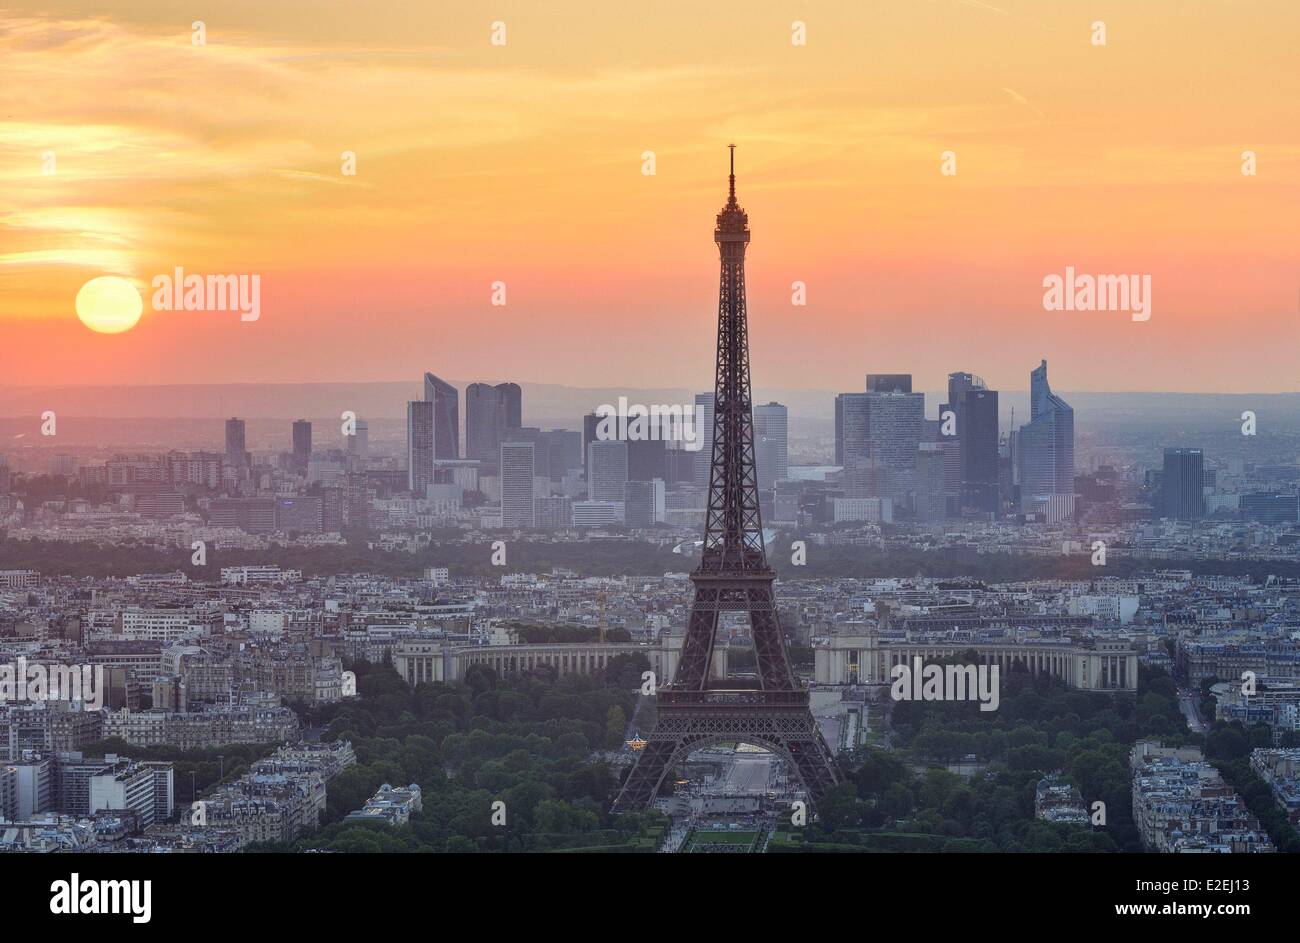 France, Paris, the Eiffel tower and La Defense in the background at sunset Stock Photo